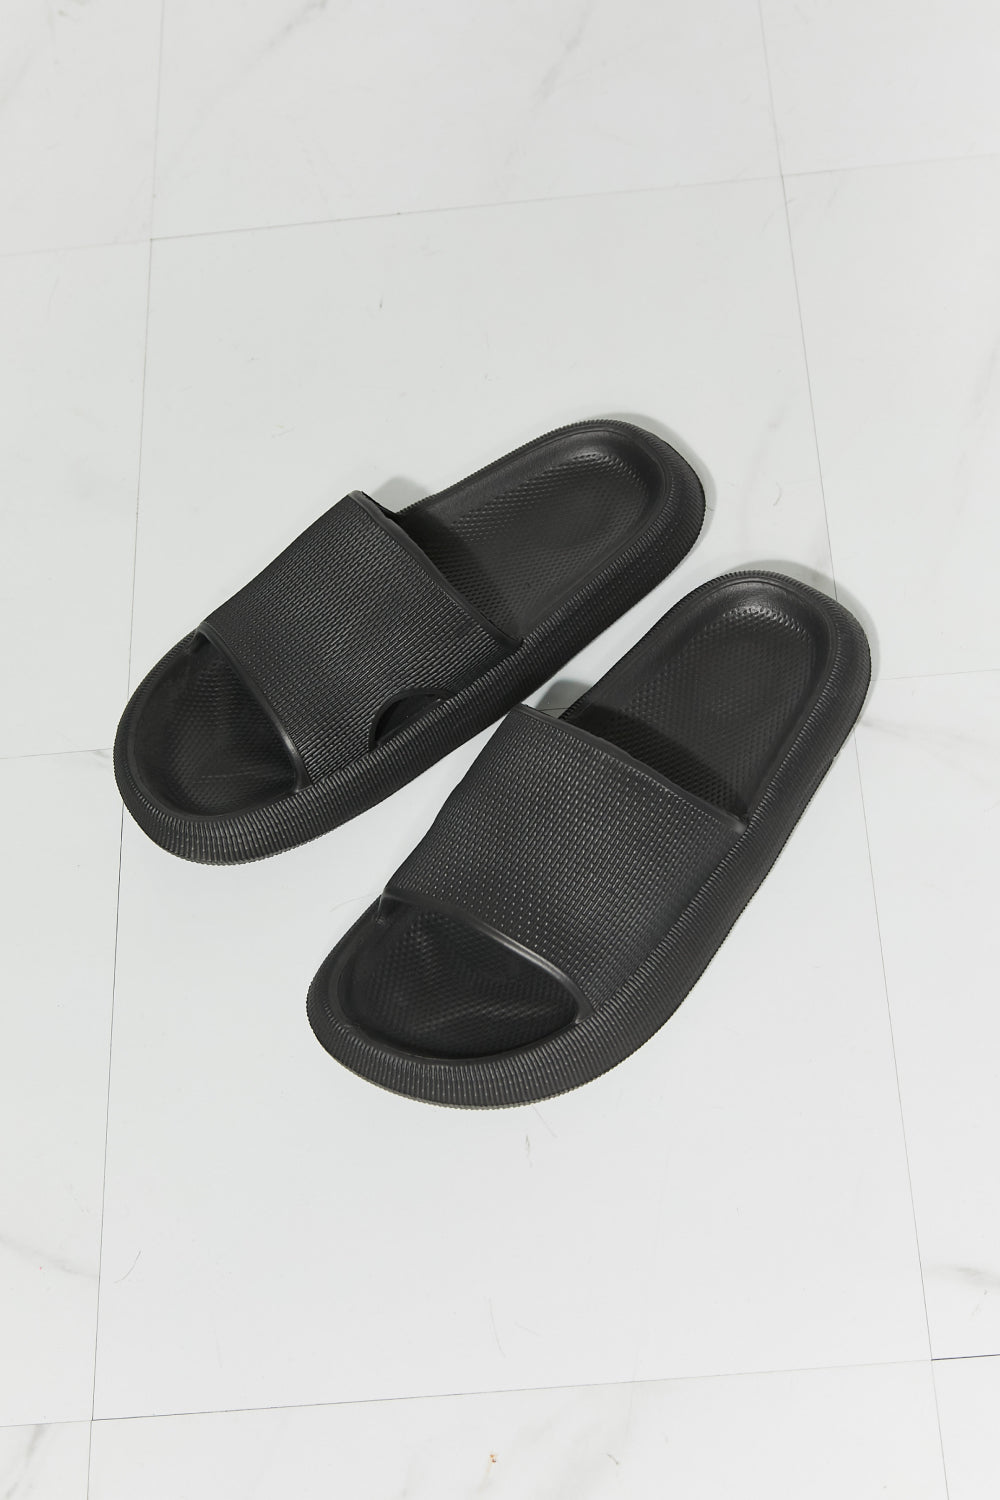 MMShoes Arms Around Me Open Toe Slide in Black COCO CRESS